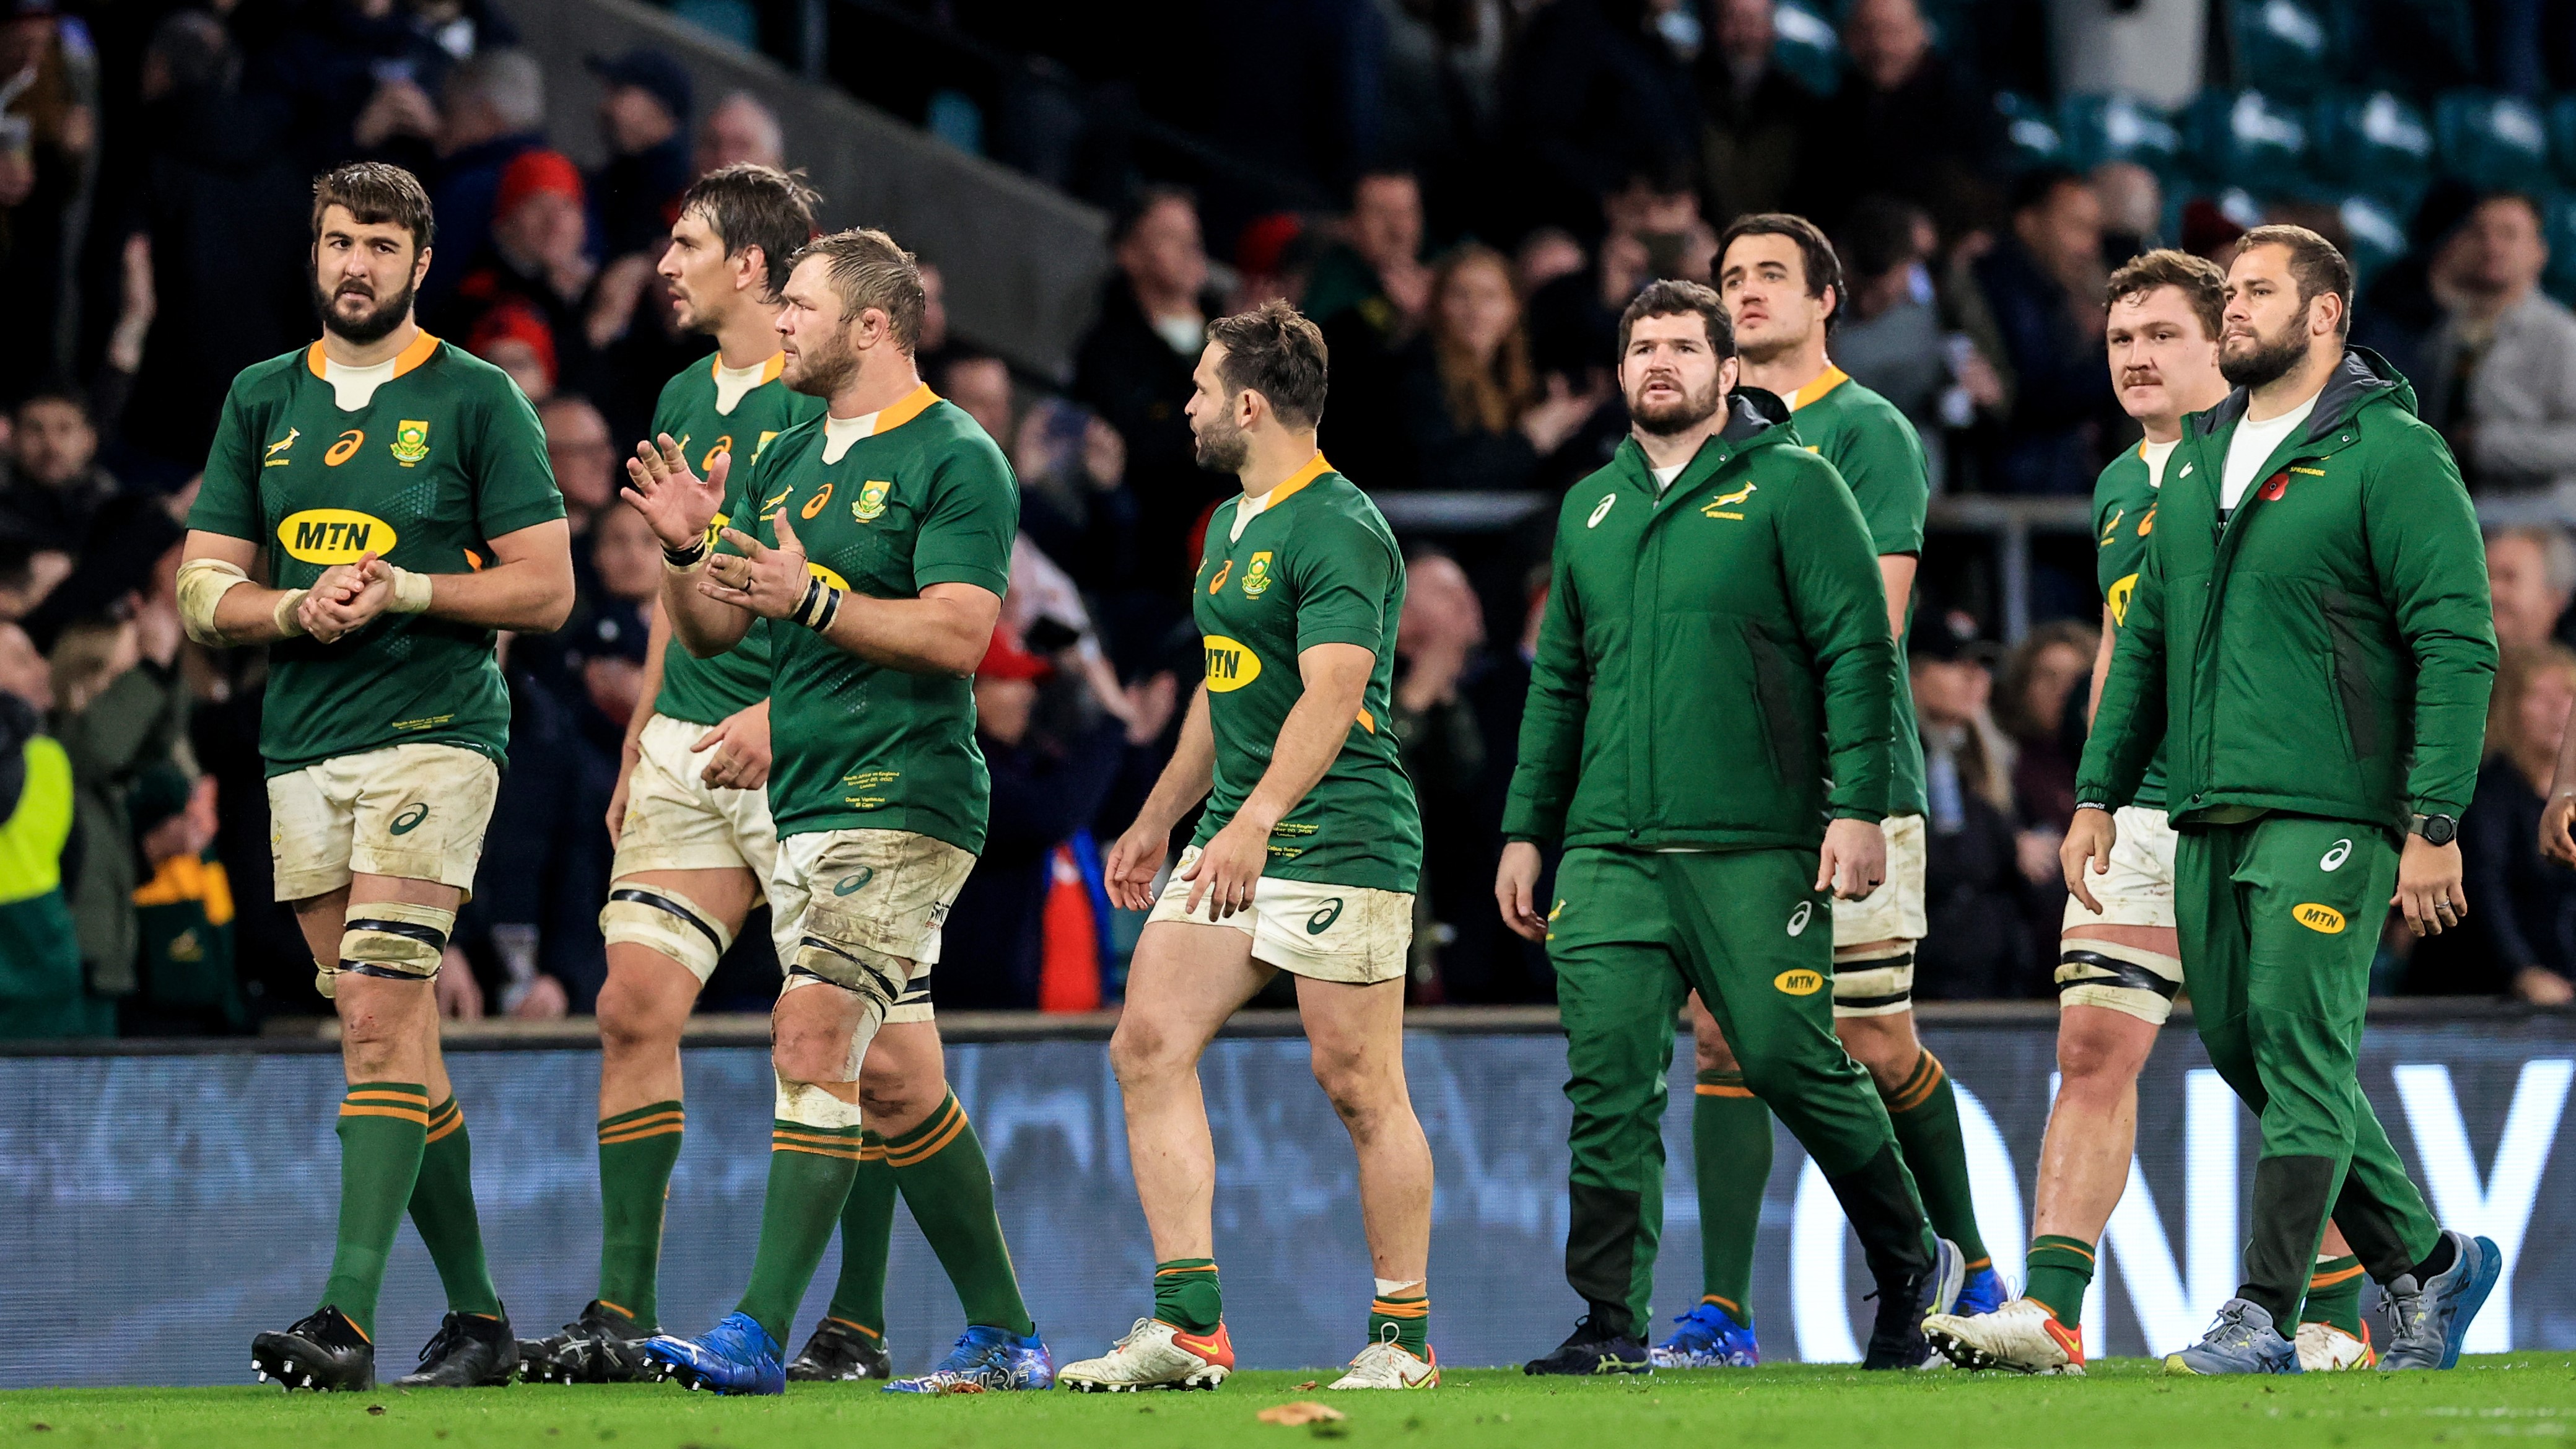 Mandatory Credit: Photo by Billy Stickland/INPHO/Shutterstock/BackpagePix (12611048bd) England vs South Africa. The Springboks dejected after the game Autumn Nations Series, Twickenham Stadium, London, England - 20 Nov 2021